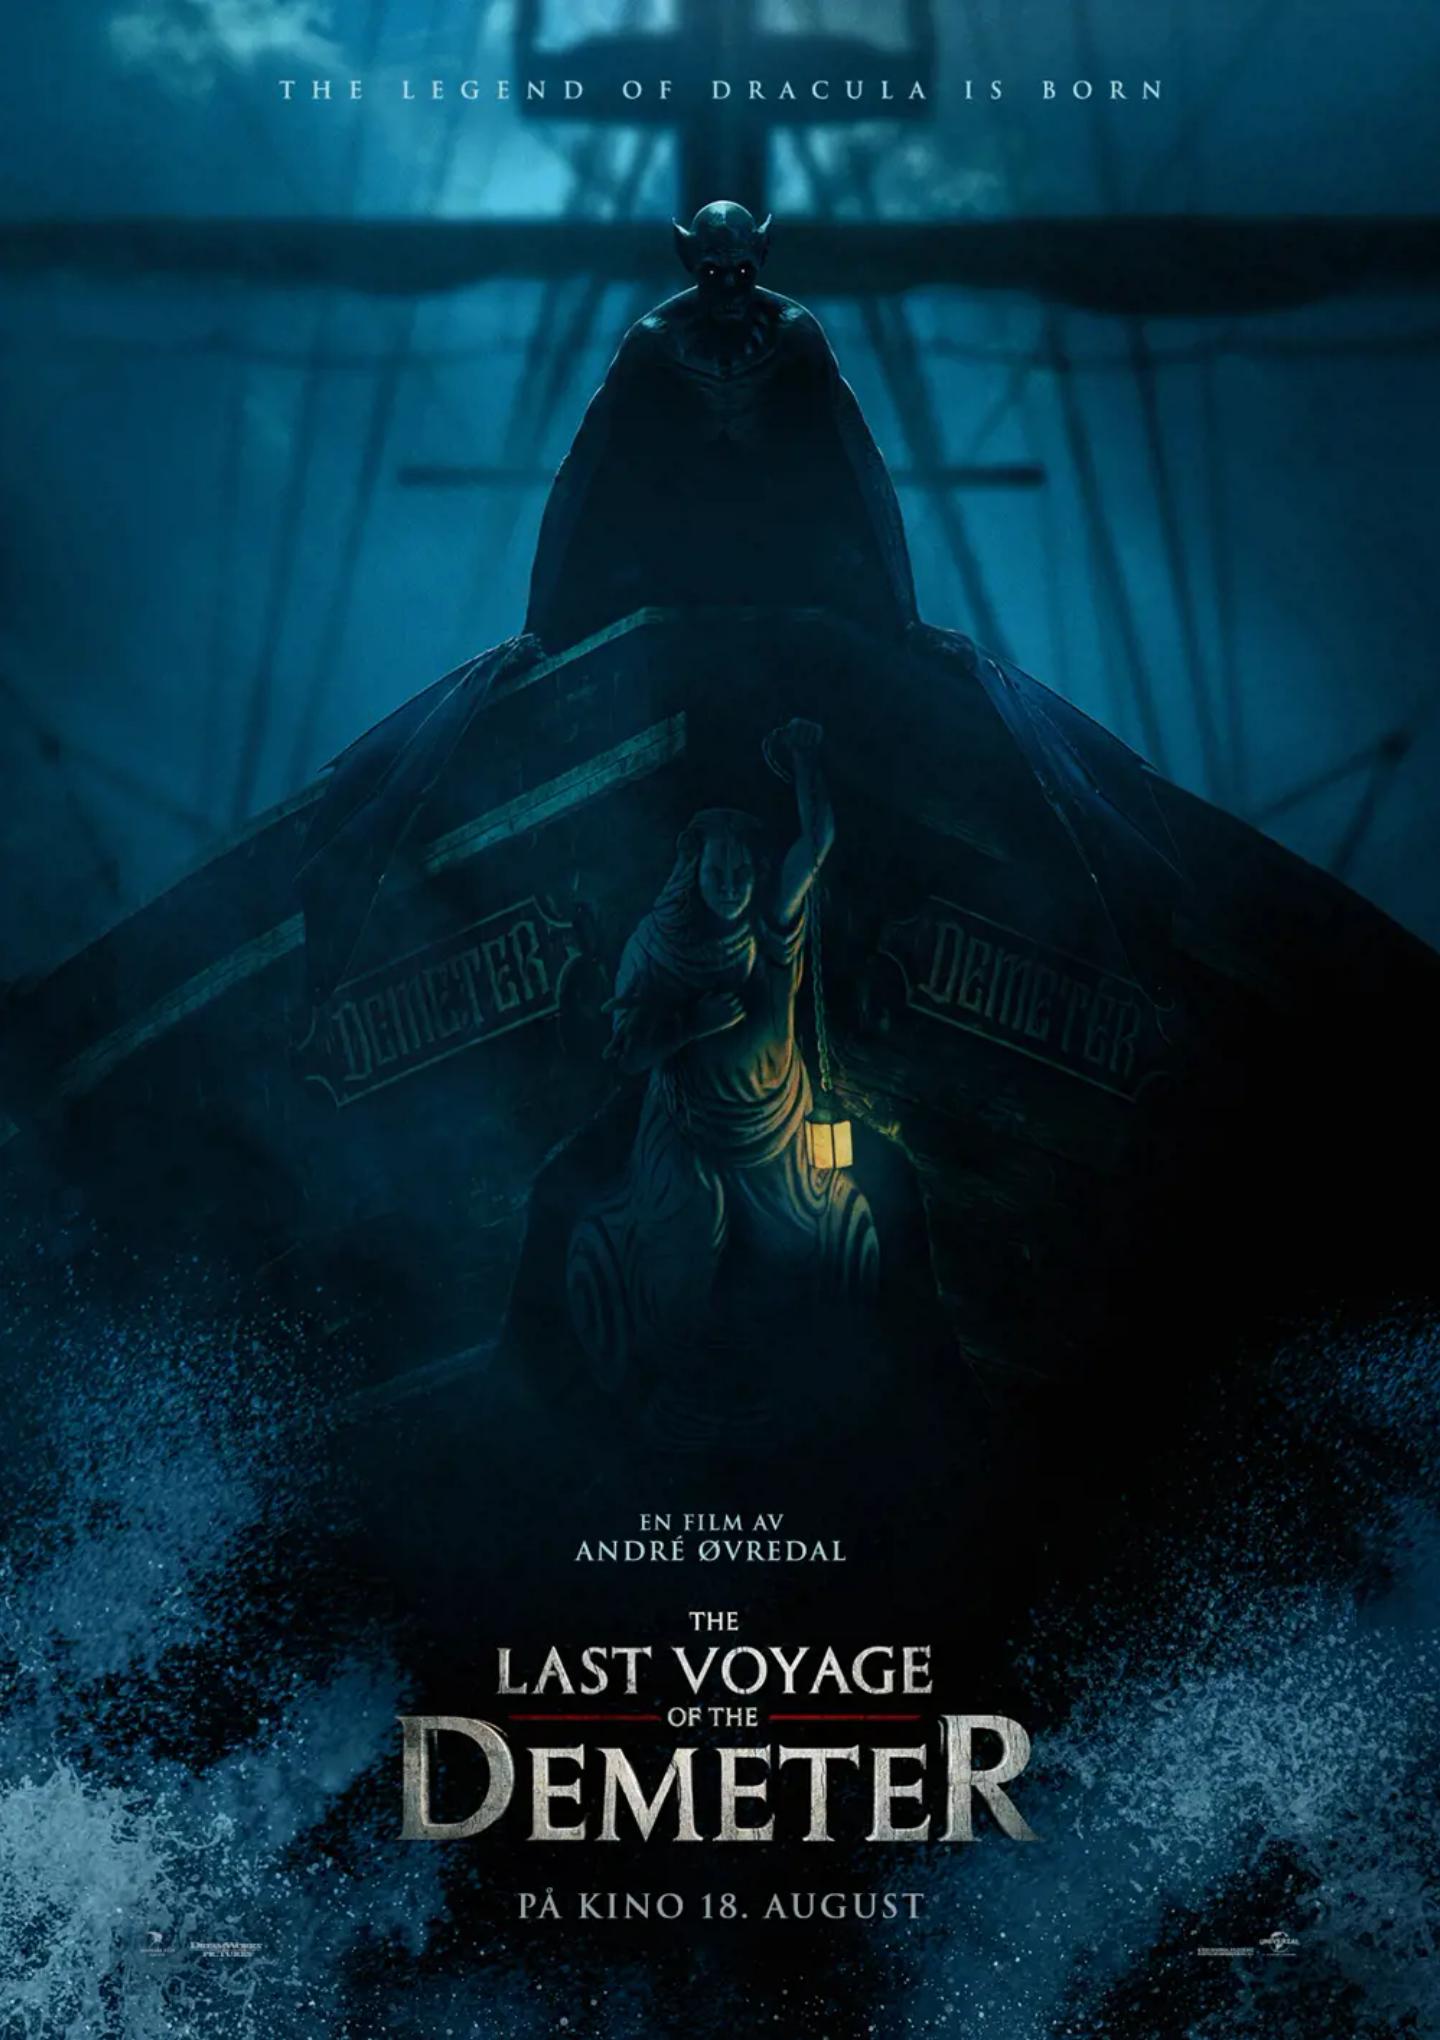 Plakat for 'The last voyage of the Demeter'